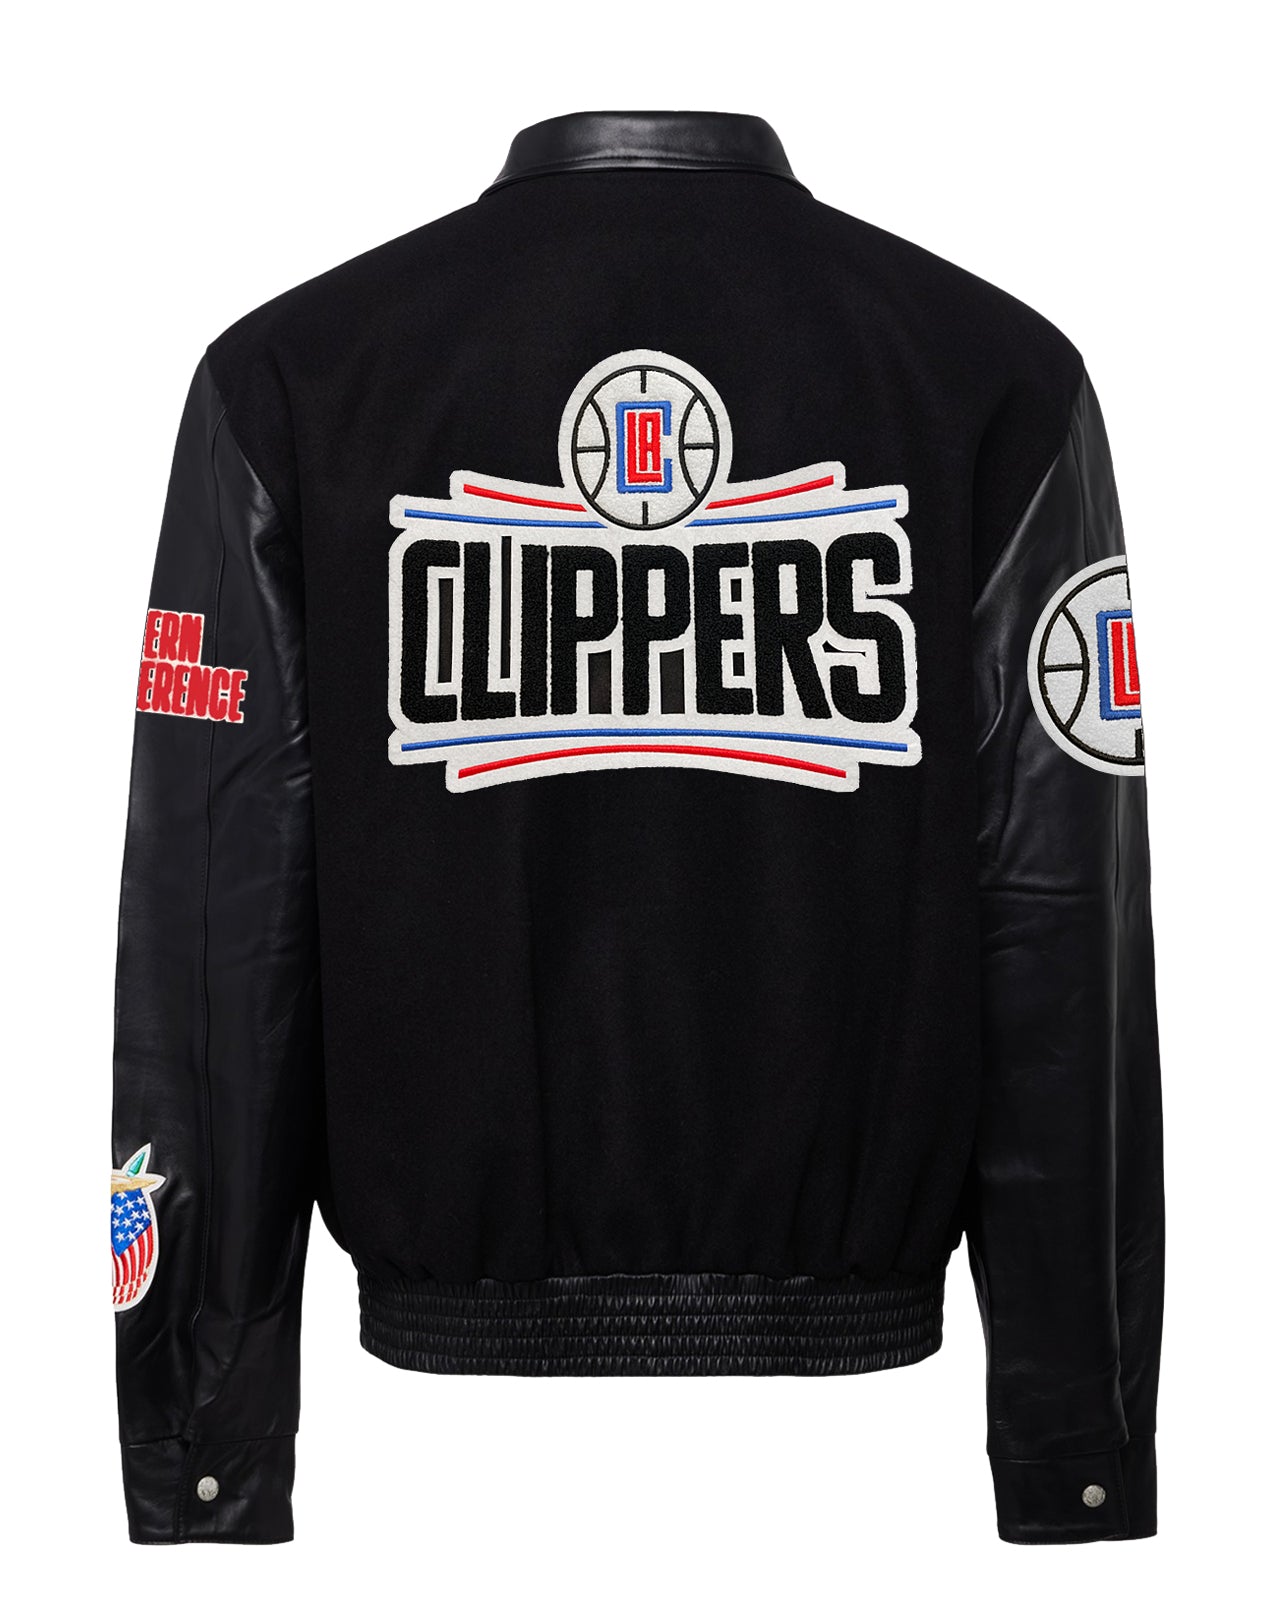 LOS ANGELES CLIPPERS WOOL & LEATHER JACKET Black